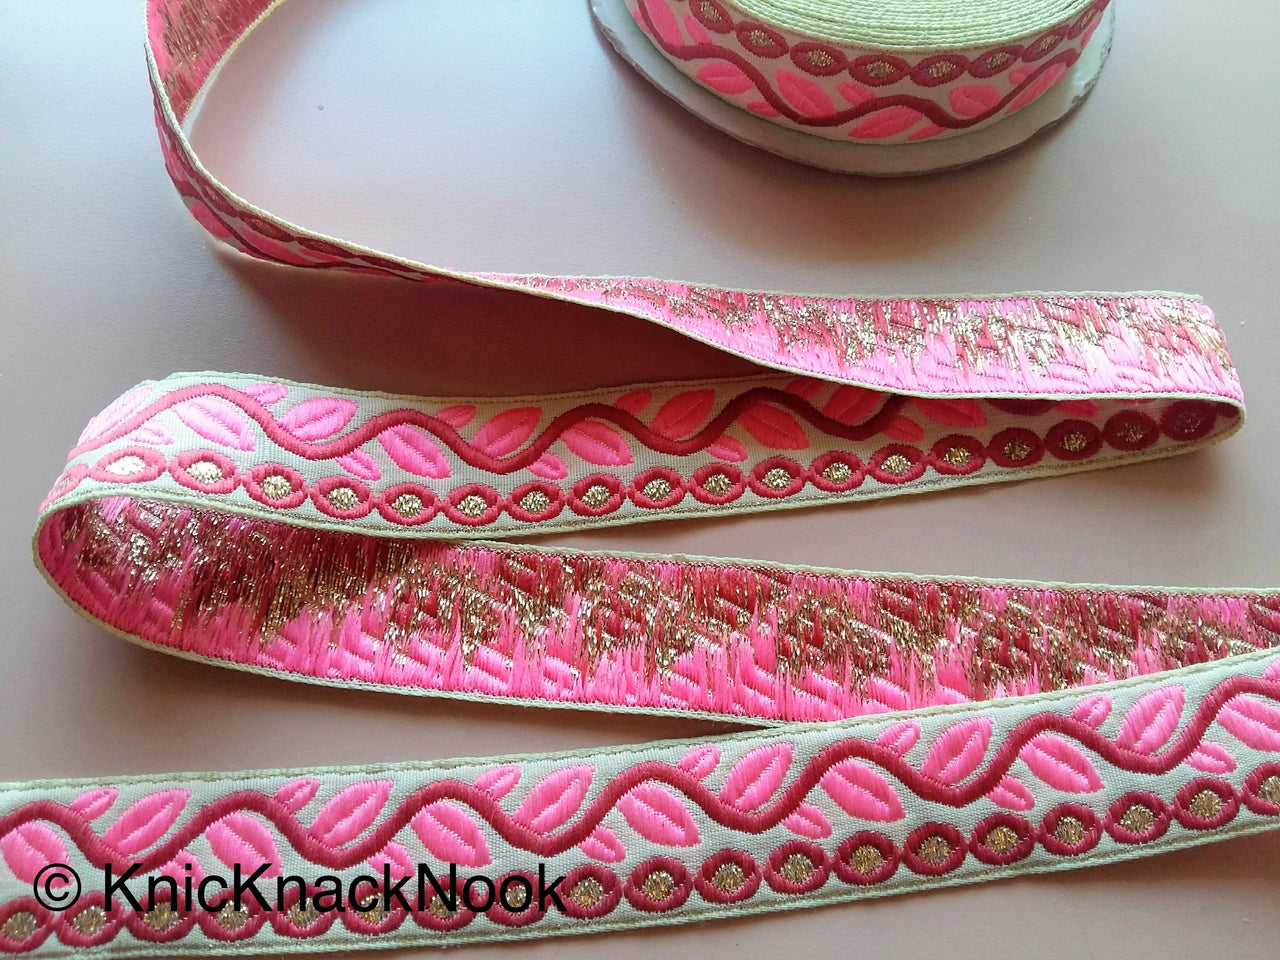 Wholesale Beige Trim With Pink And Gold Leaves On Vine Weave Jacquard Trim, Approx. 30mm Wide Trim by 9 Yards, Indian Border Craft Ribbon